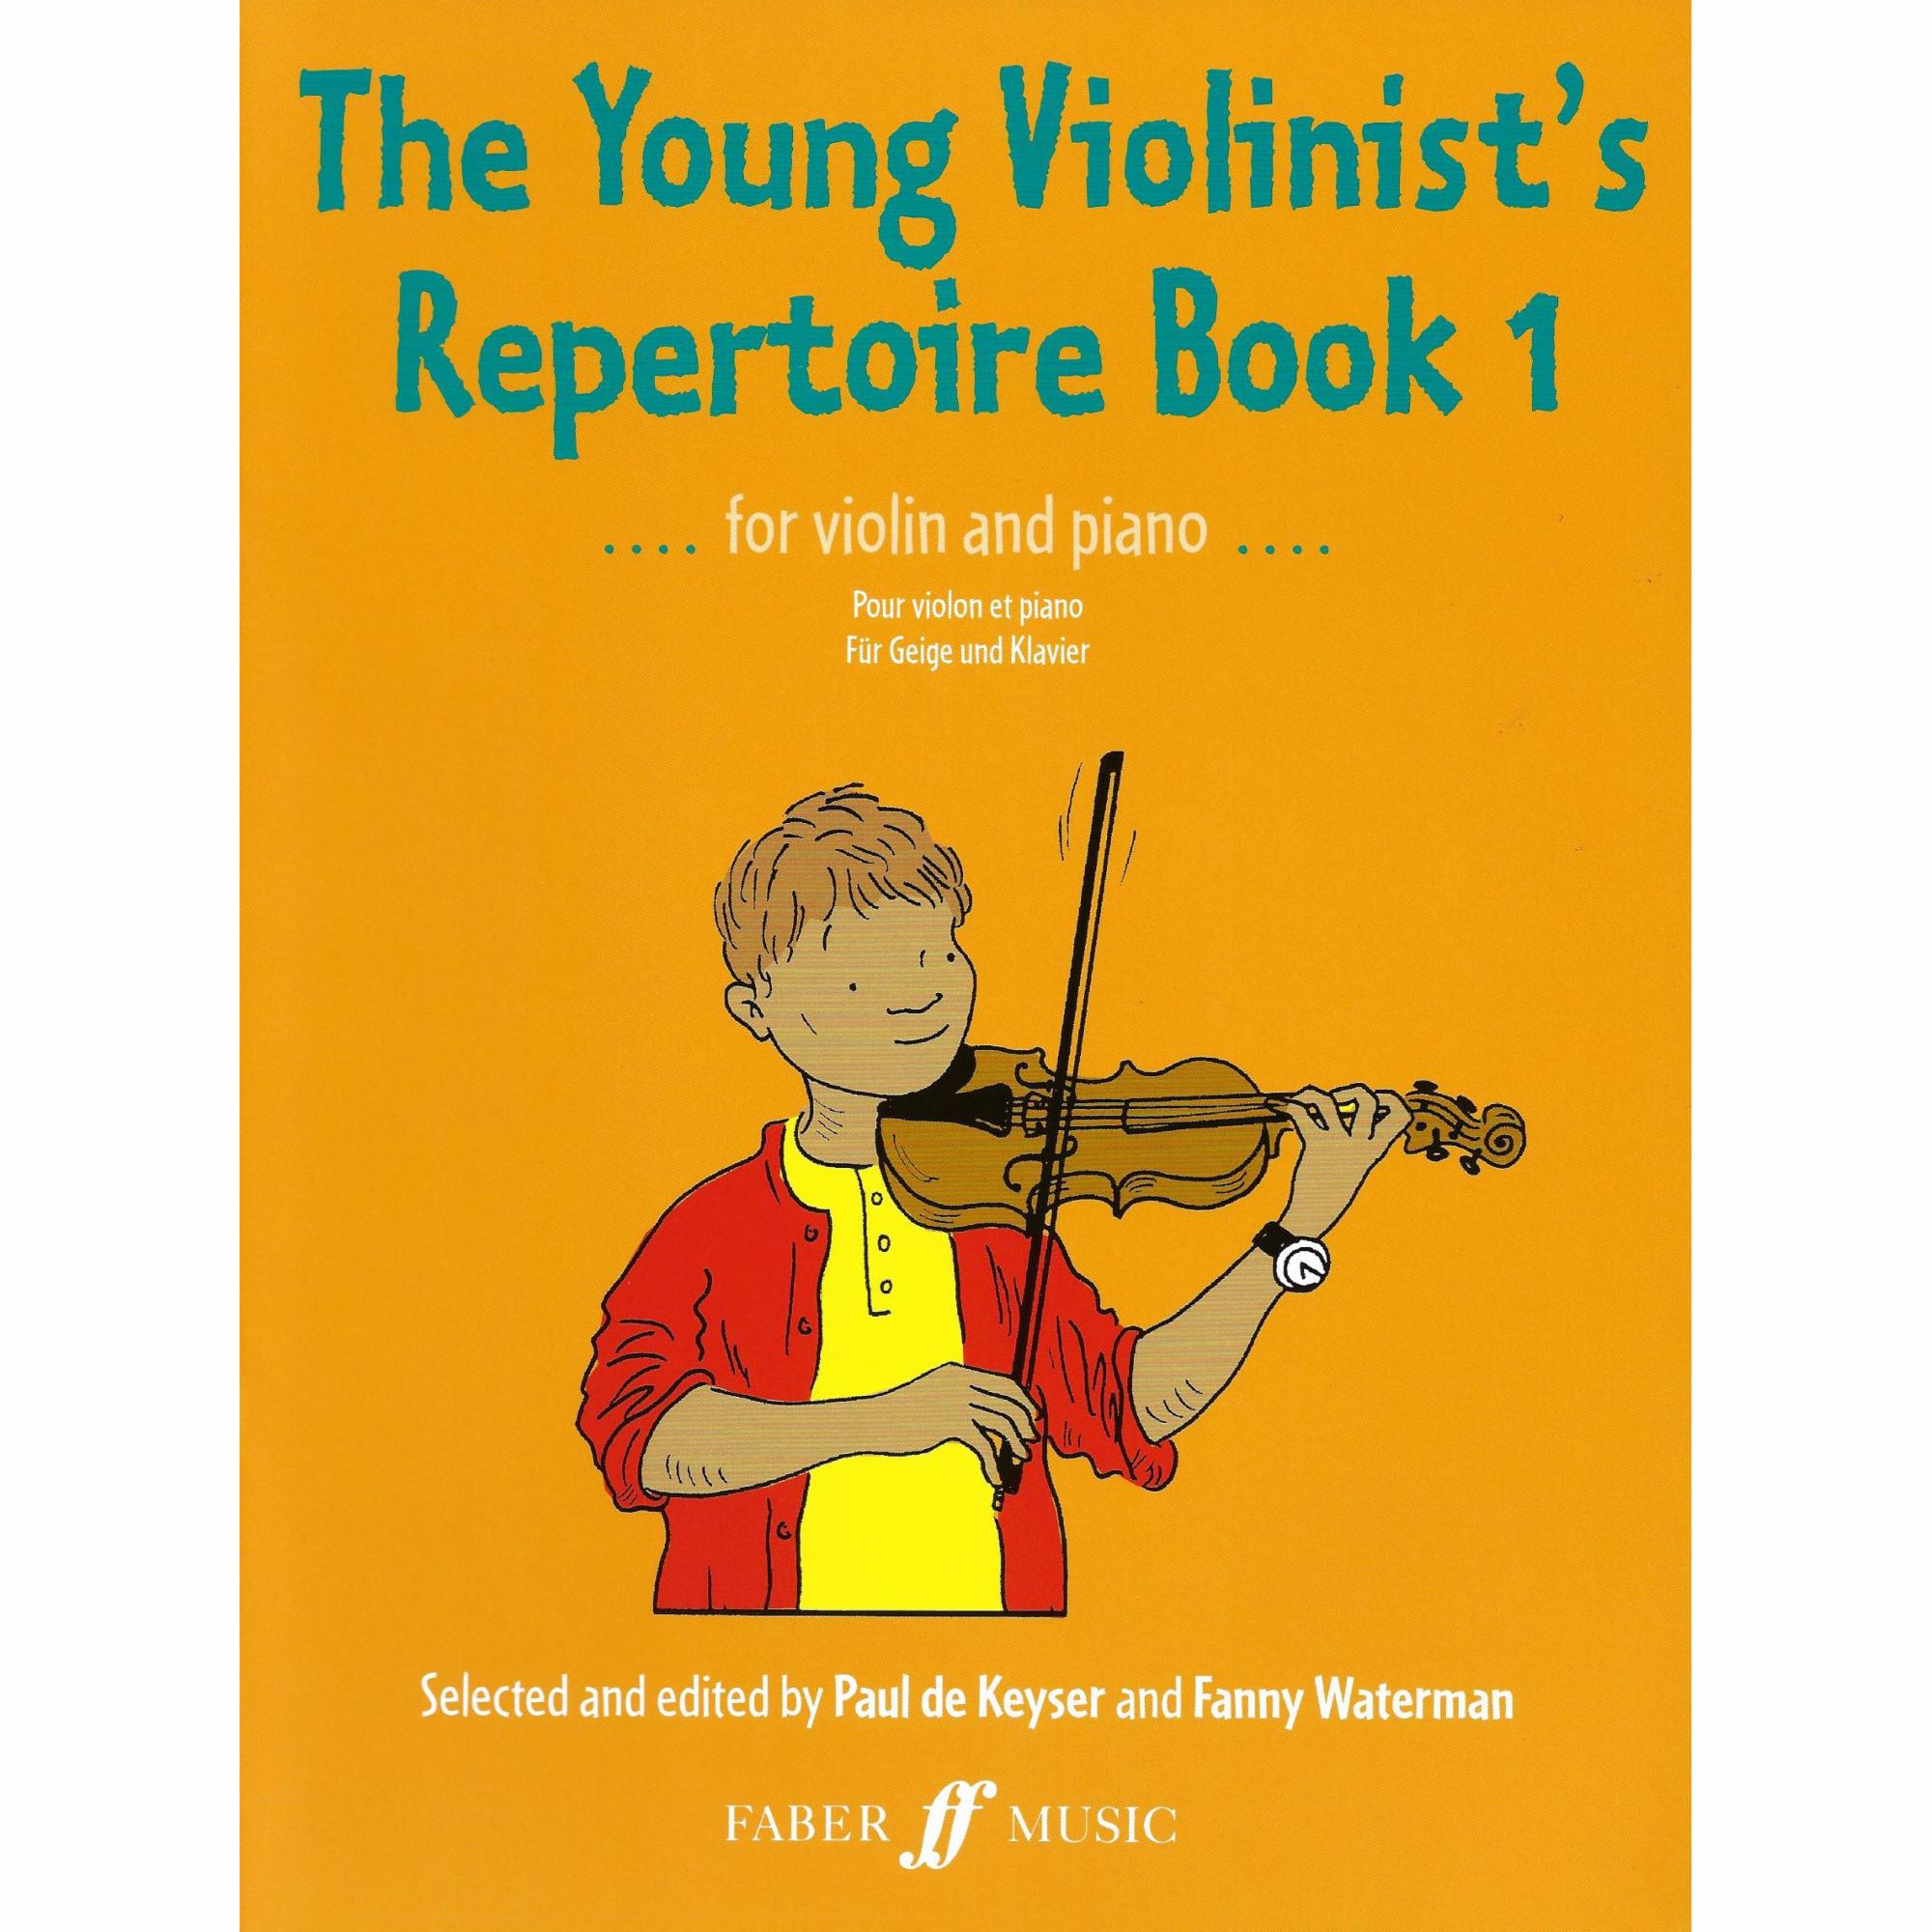 The Young Violinist's Repertoire Books 1-4